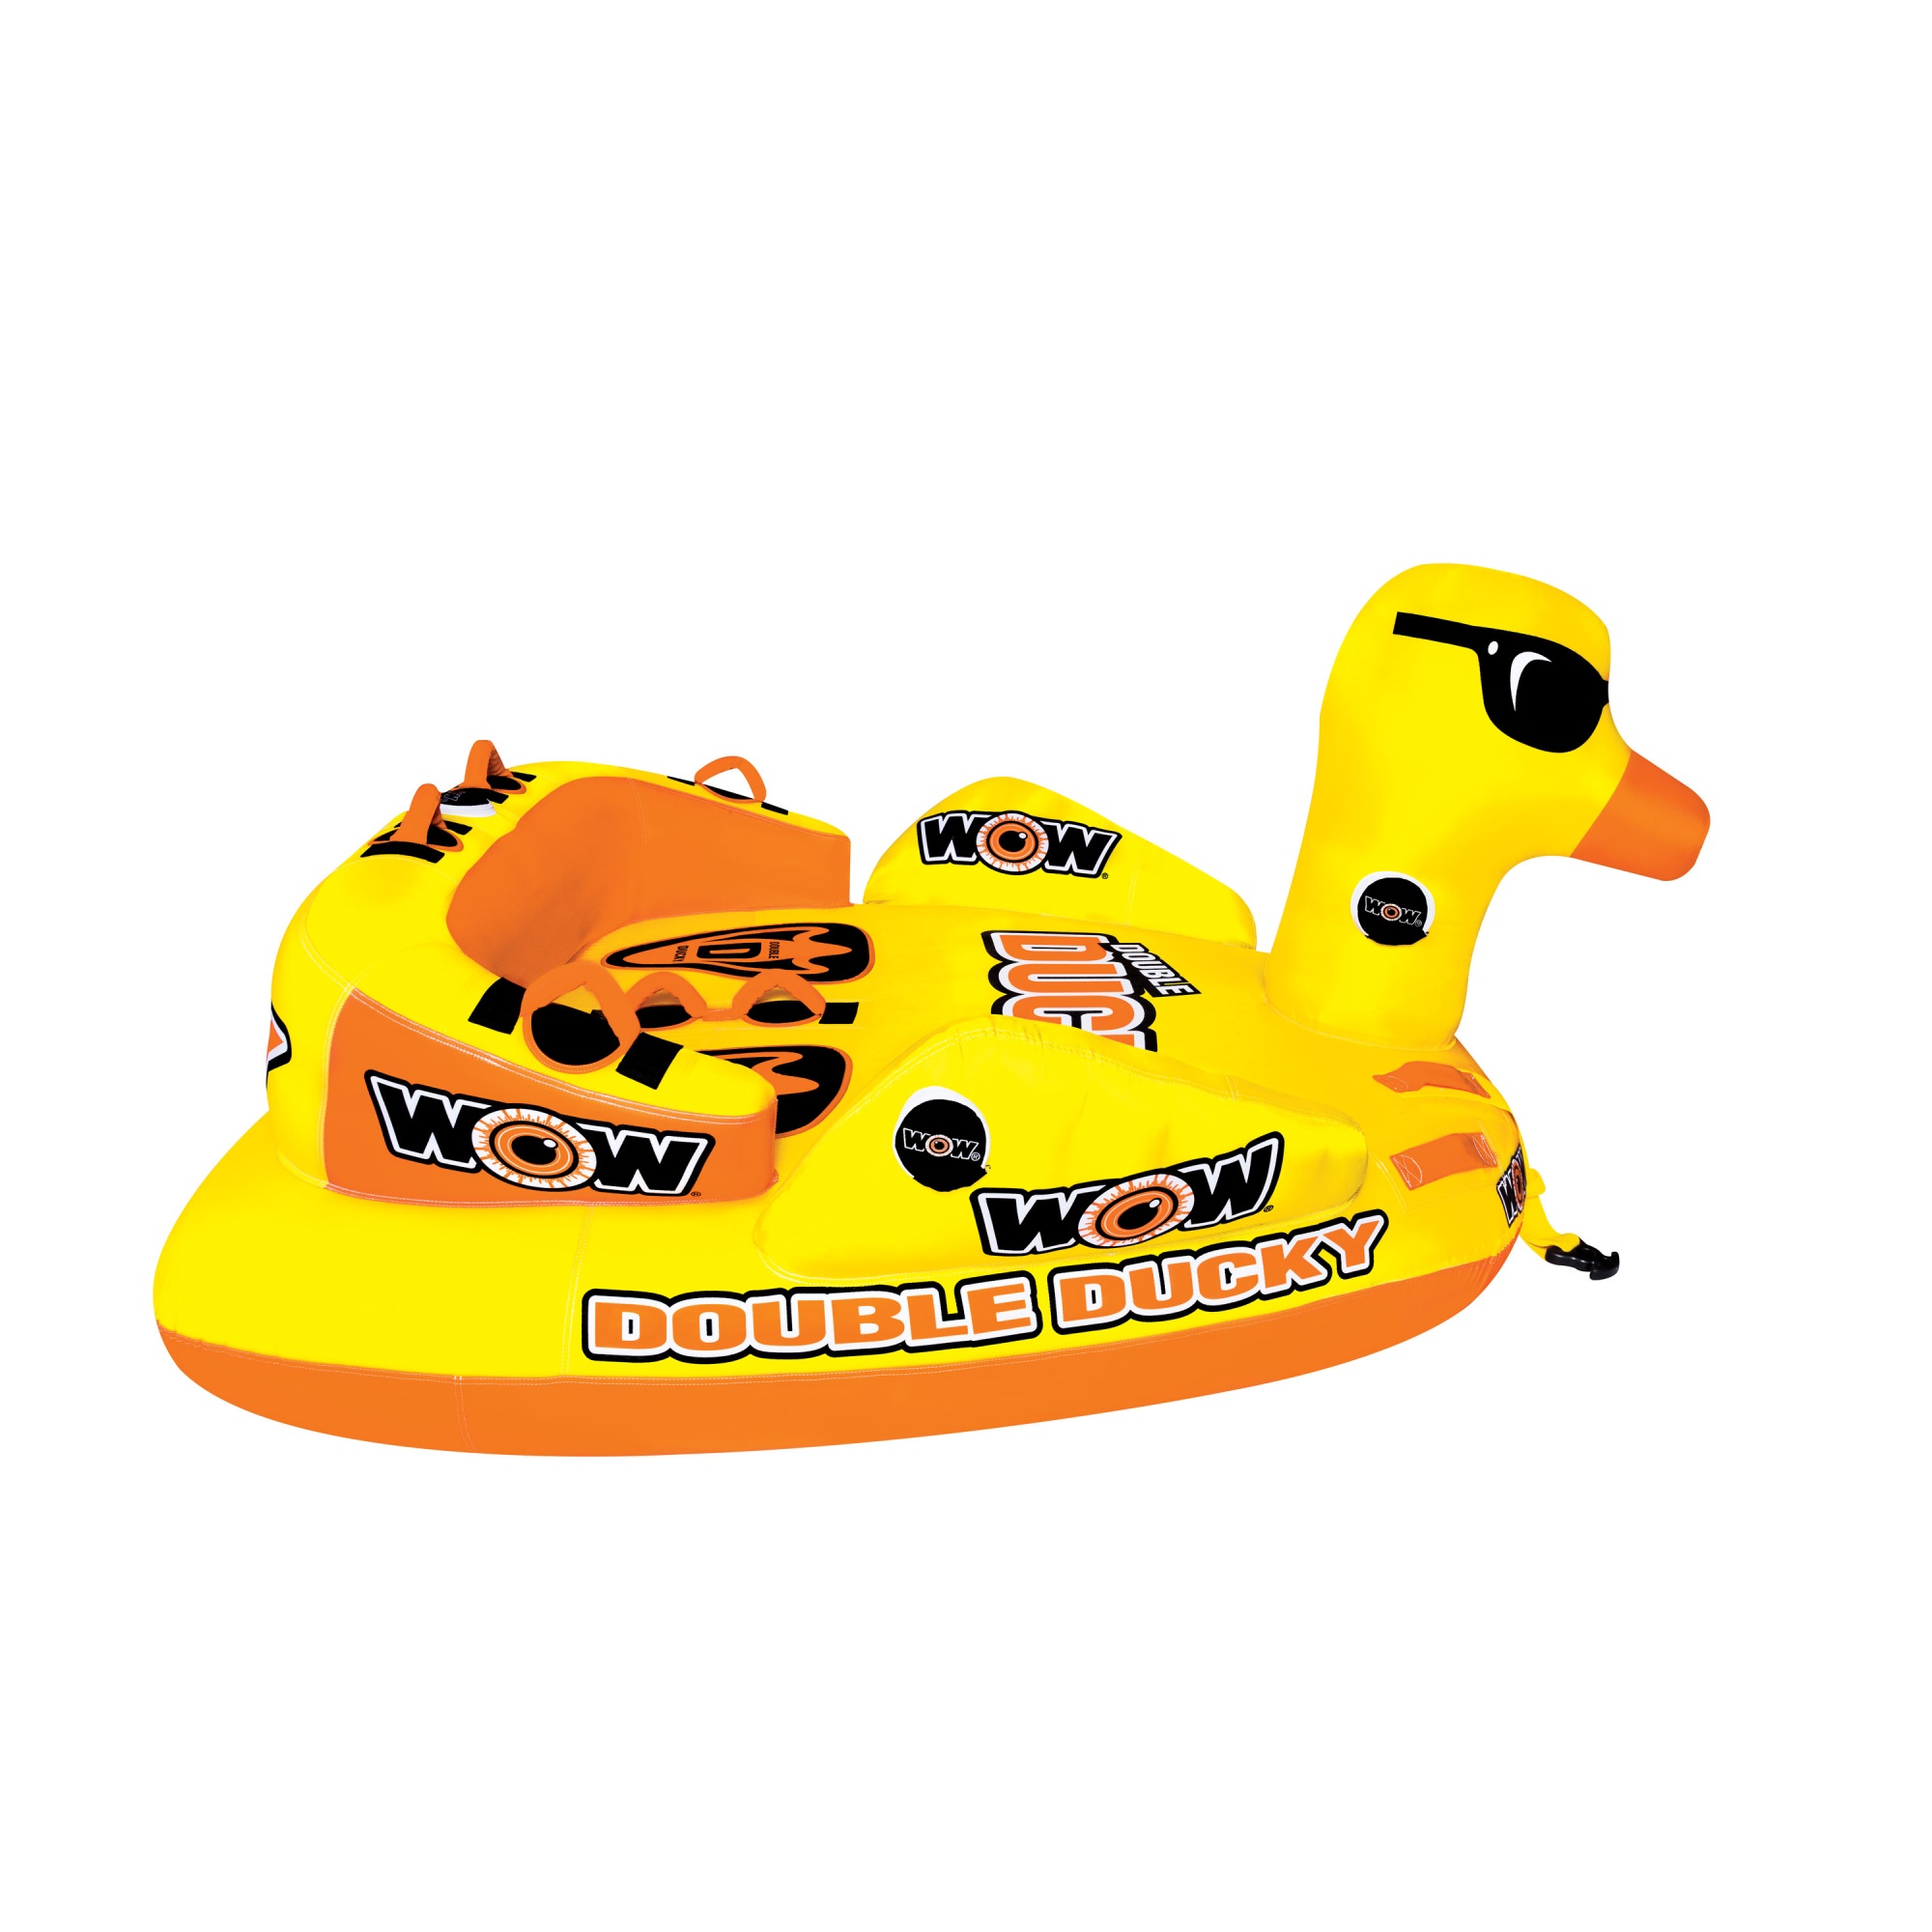 WOW Watersports 19-1050 Double Ducky 2-Rider Towable